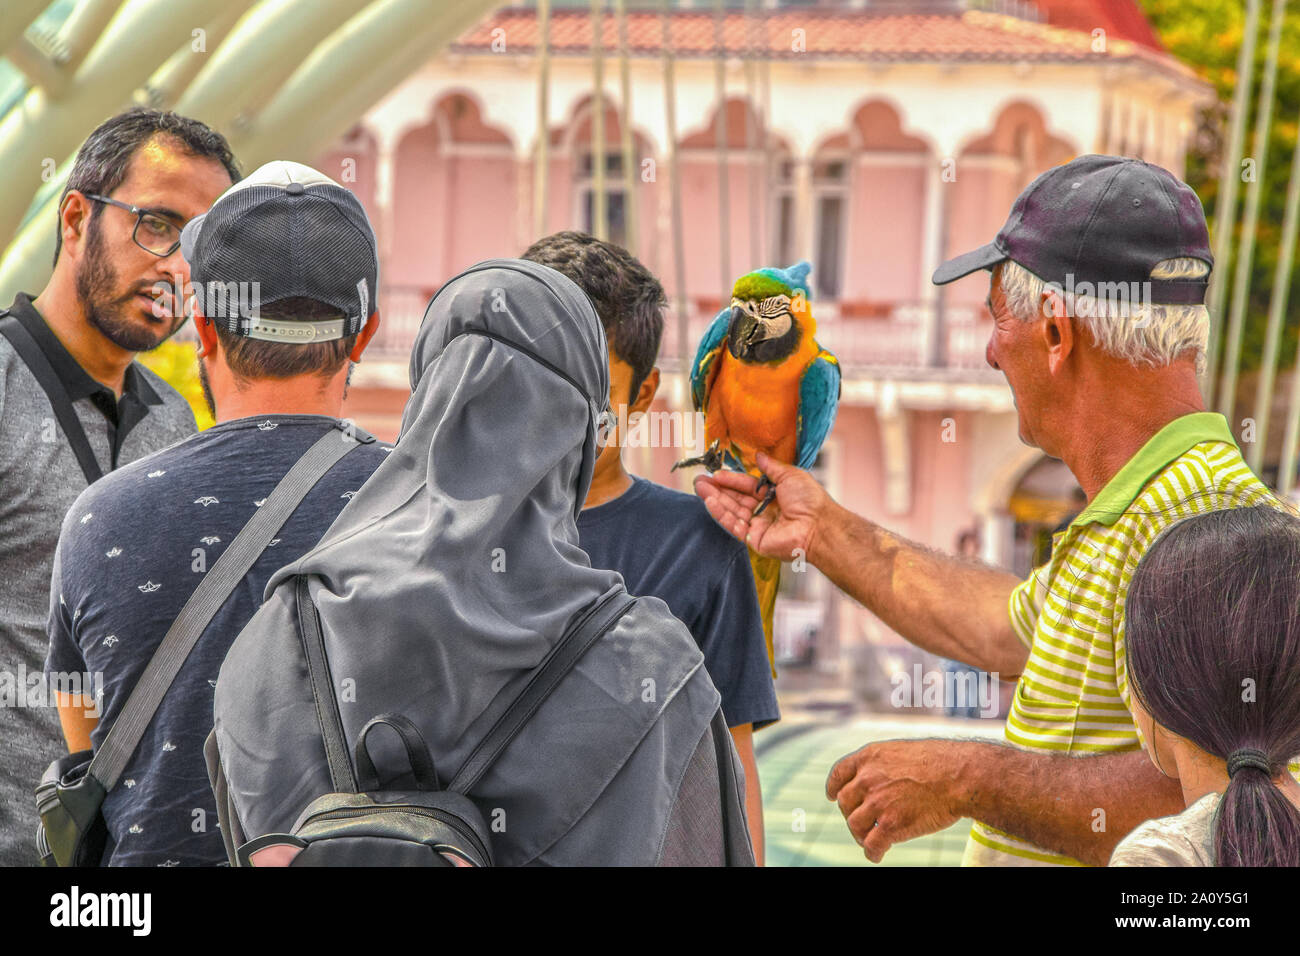 7 19 2019 Tbilisi Georgia -Pedestrian Bridge of Peace - woman in hijab with cute backpack with ears and sunglasses - husband conversed earnestly with Stock Photo